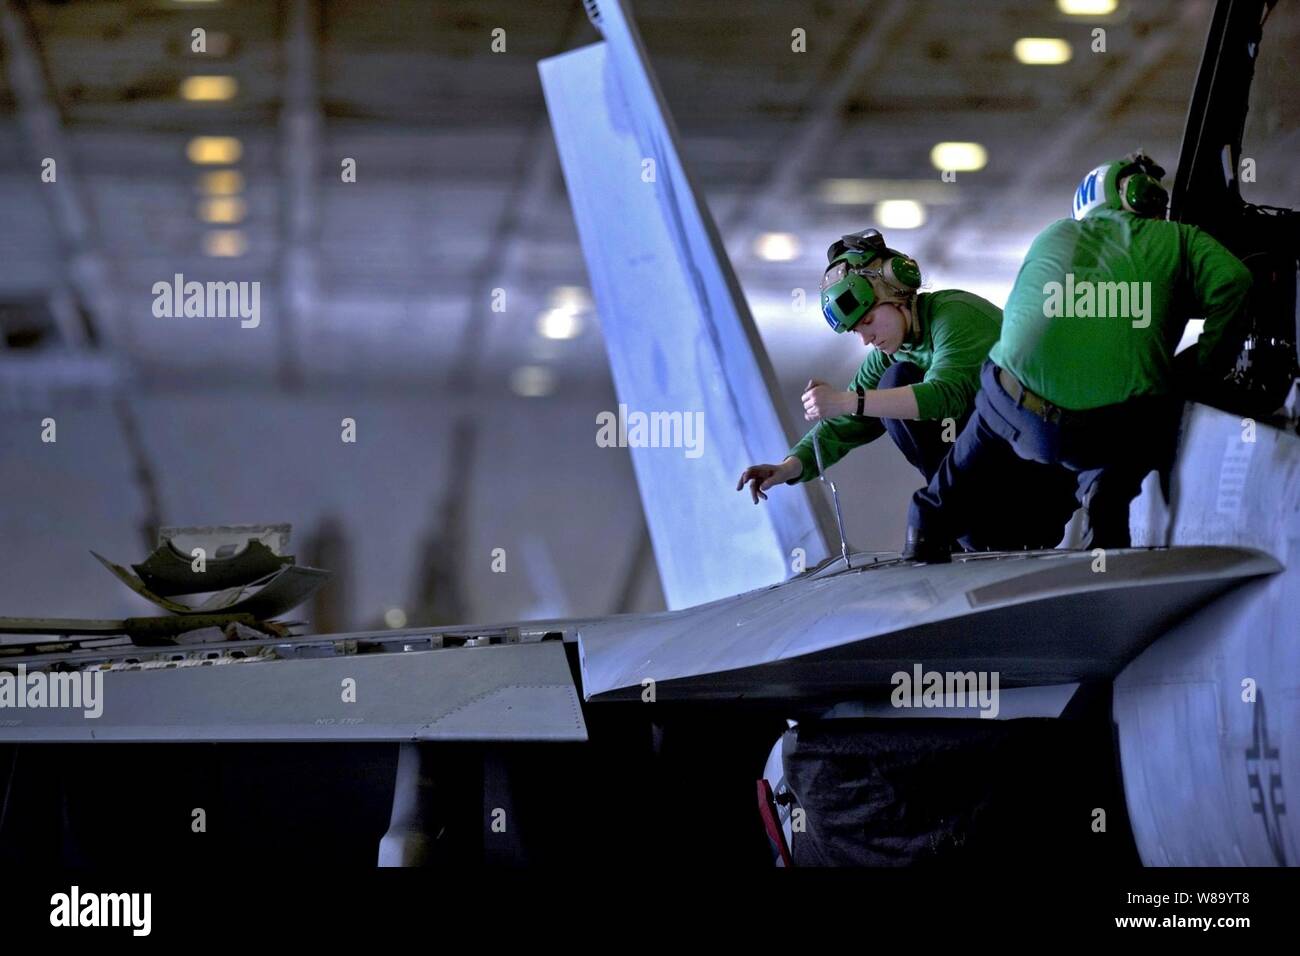 U.S. Navy Petty Officer 3rd Class Jessica Murphy, assigned to Strike Fighter Squadron 22, performs maintenance on an F/A-18F Super Hornet aircraft aboard the aircraft carrier USS Carl Vinson (CVN 70) underway in the Arabian Sea on Feb. 24, 2011. Stock Photo